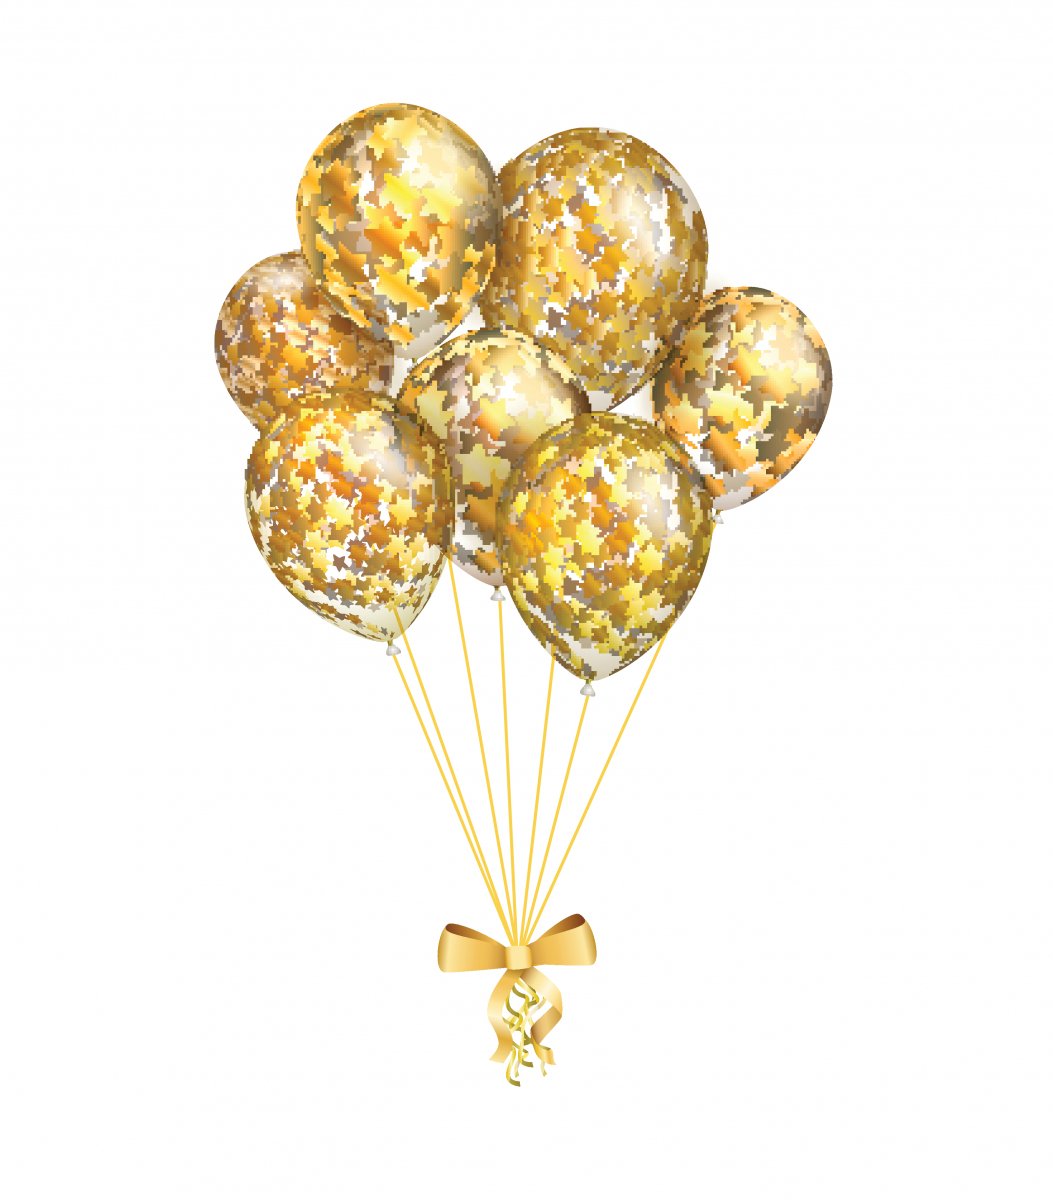 48944816-bunch-of-balloon-with-golden-stars-on-the-white-bakground